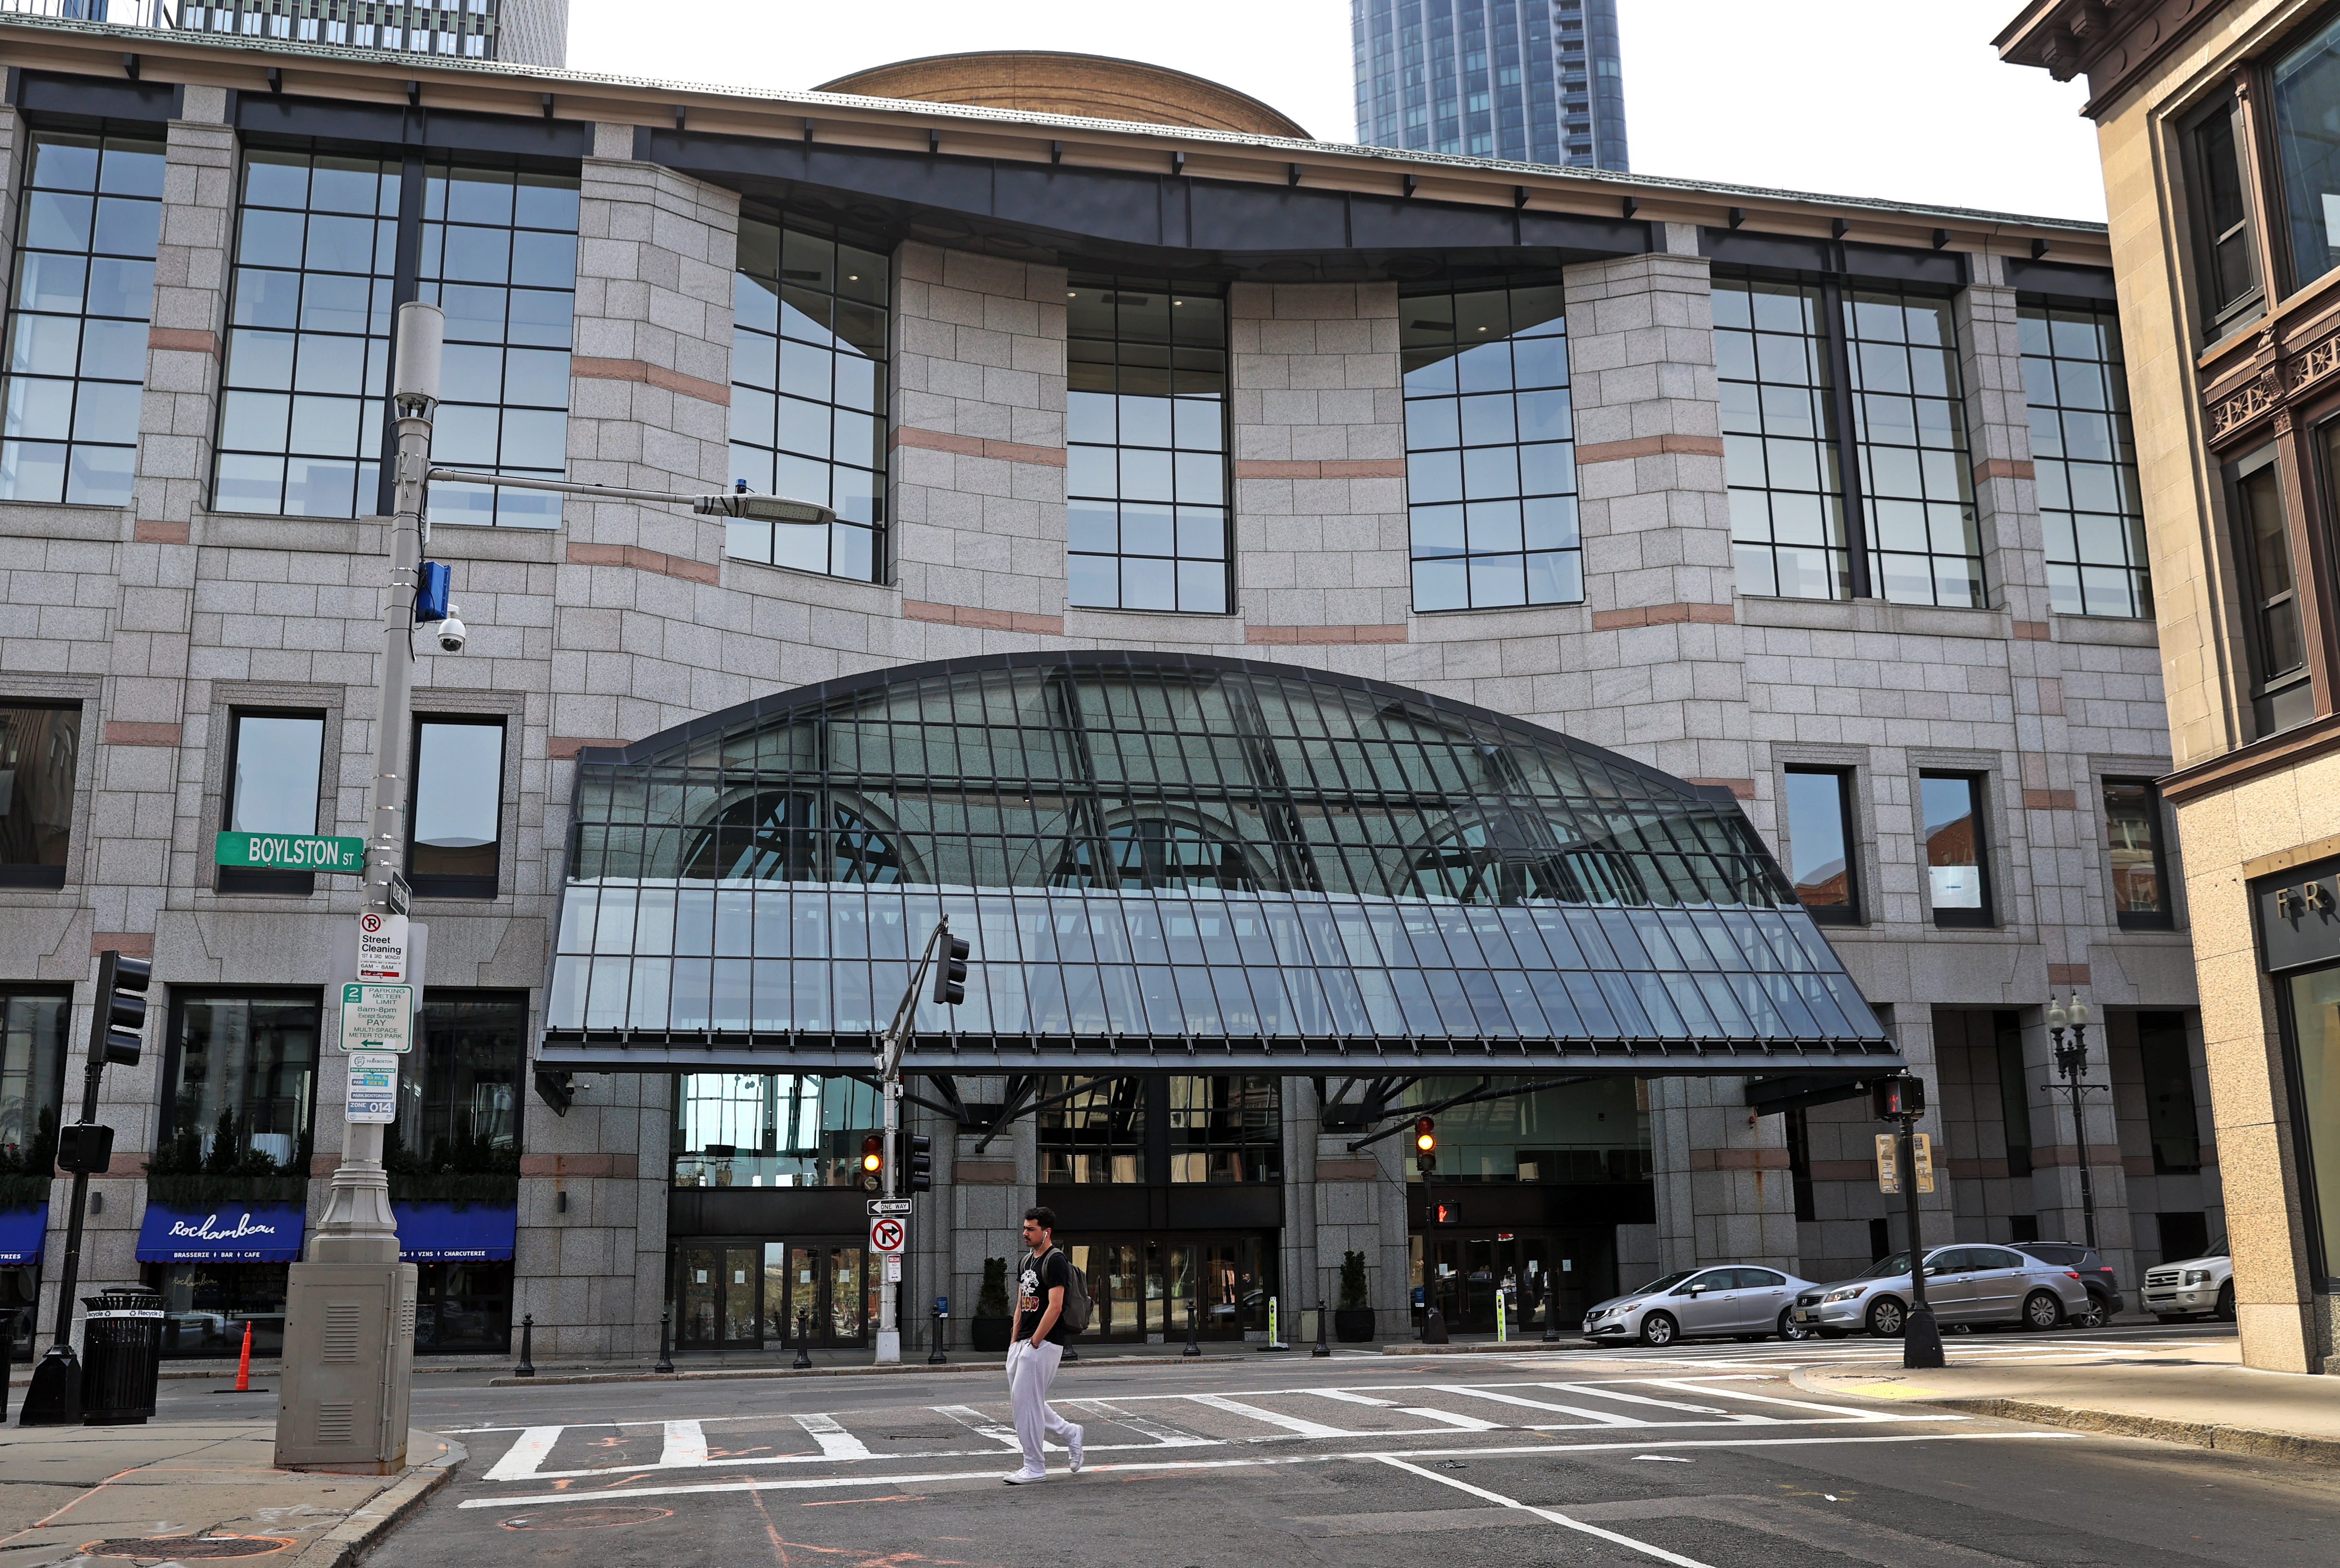 What Should Be Next for the Hynes Convention Center?